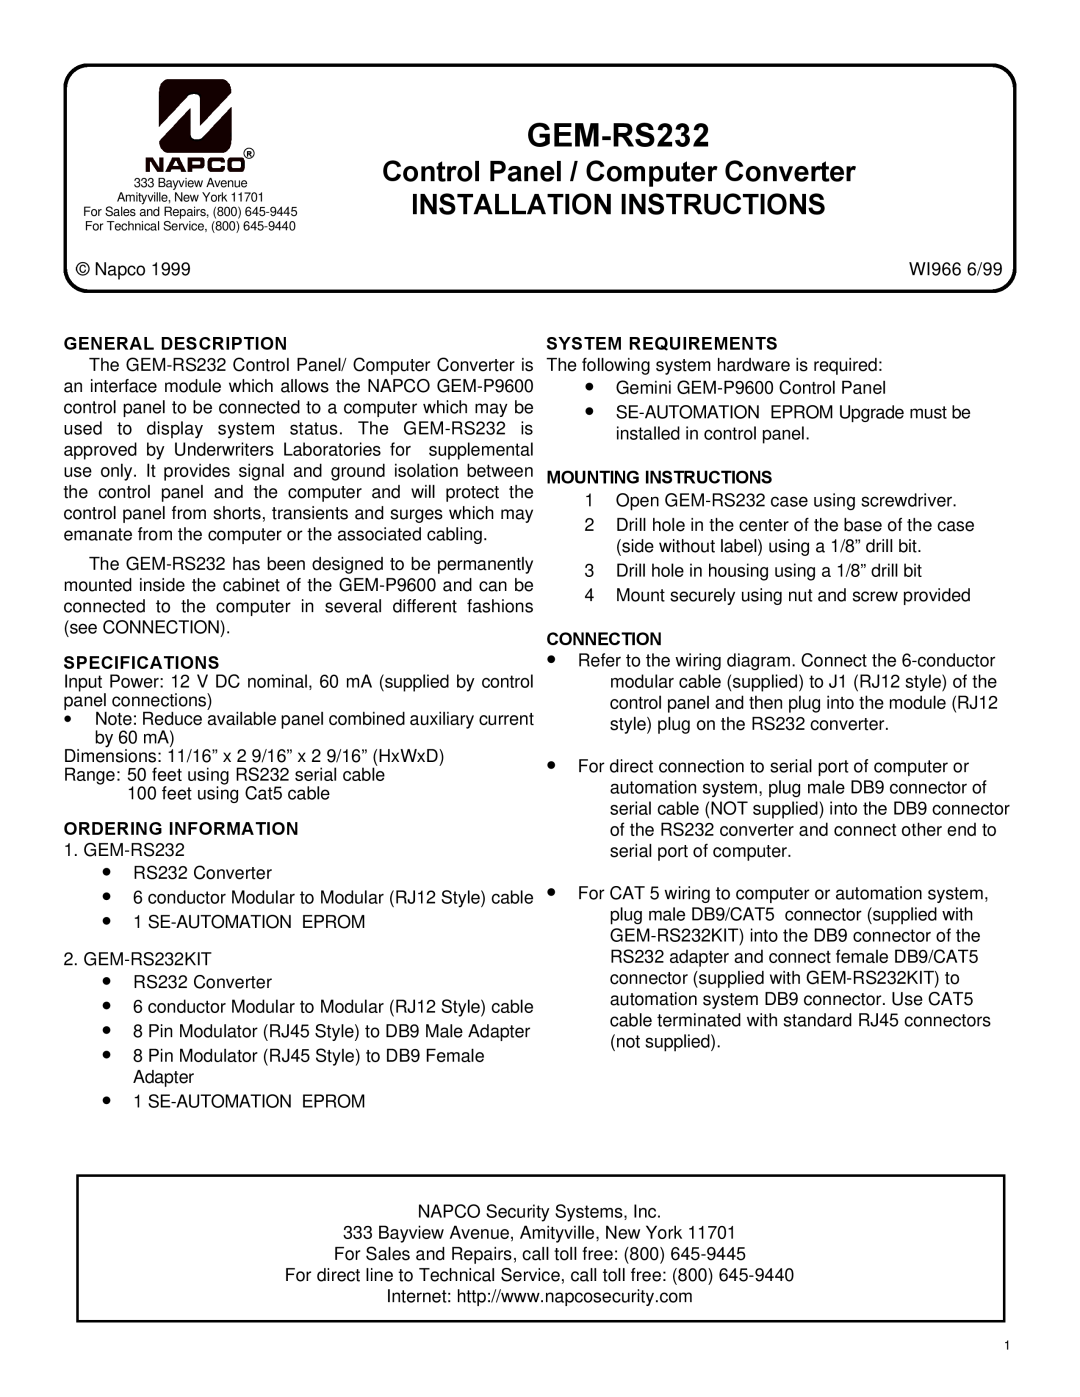 Napco Security Technologies GEM-RS232 installation instructions General Description, Specifications, Ordering Information 